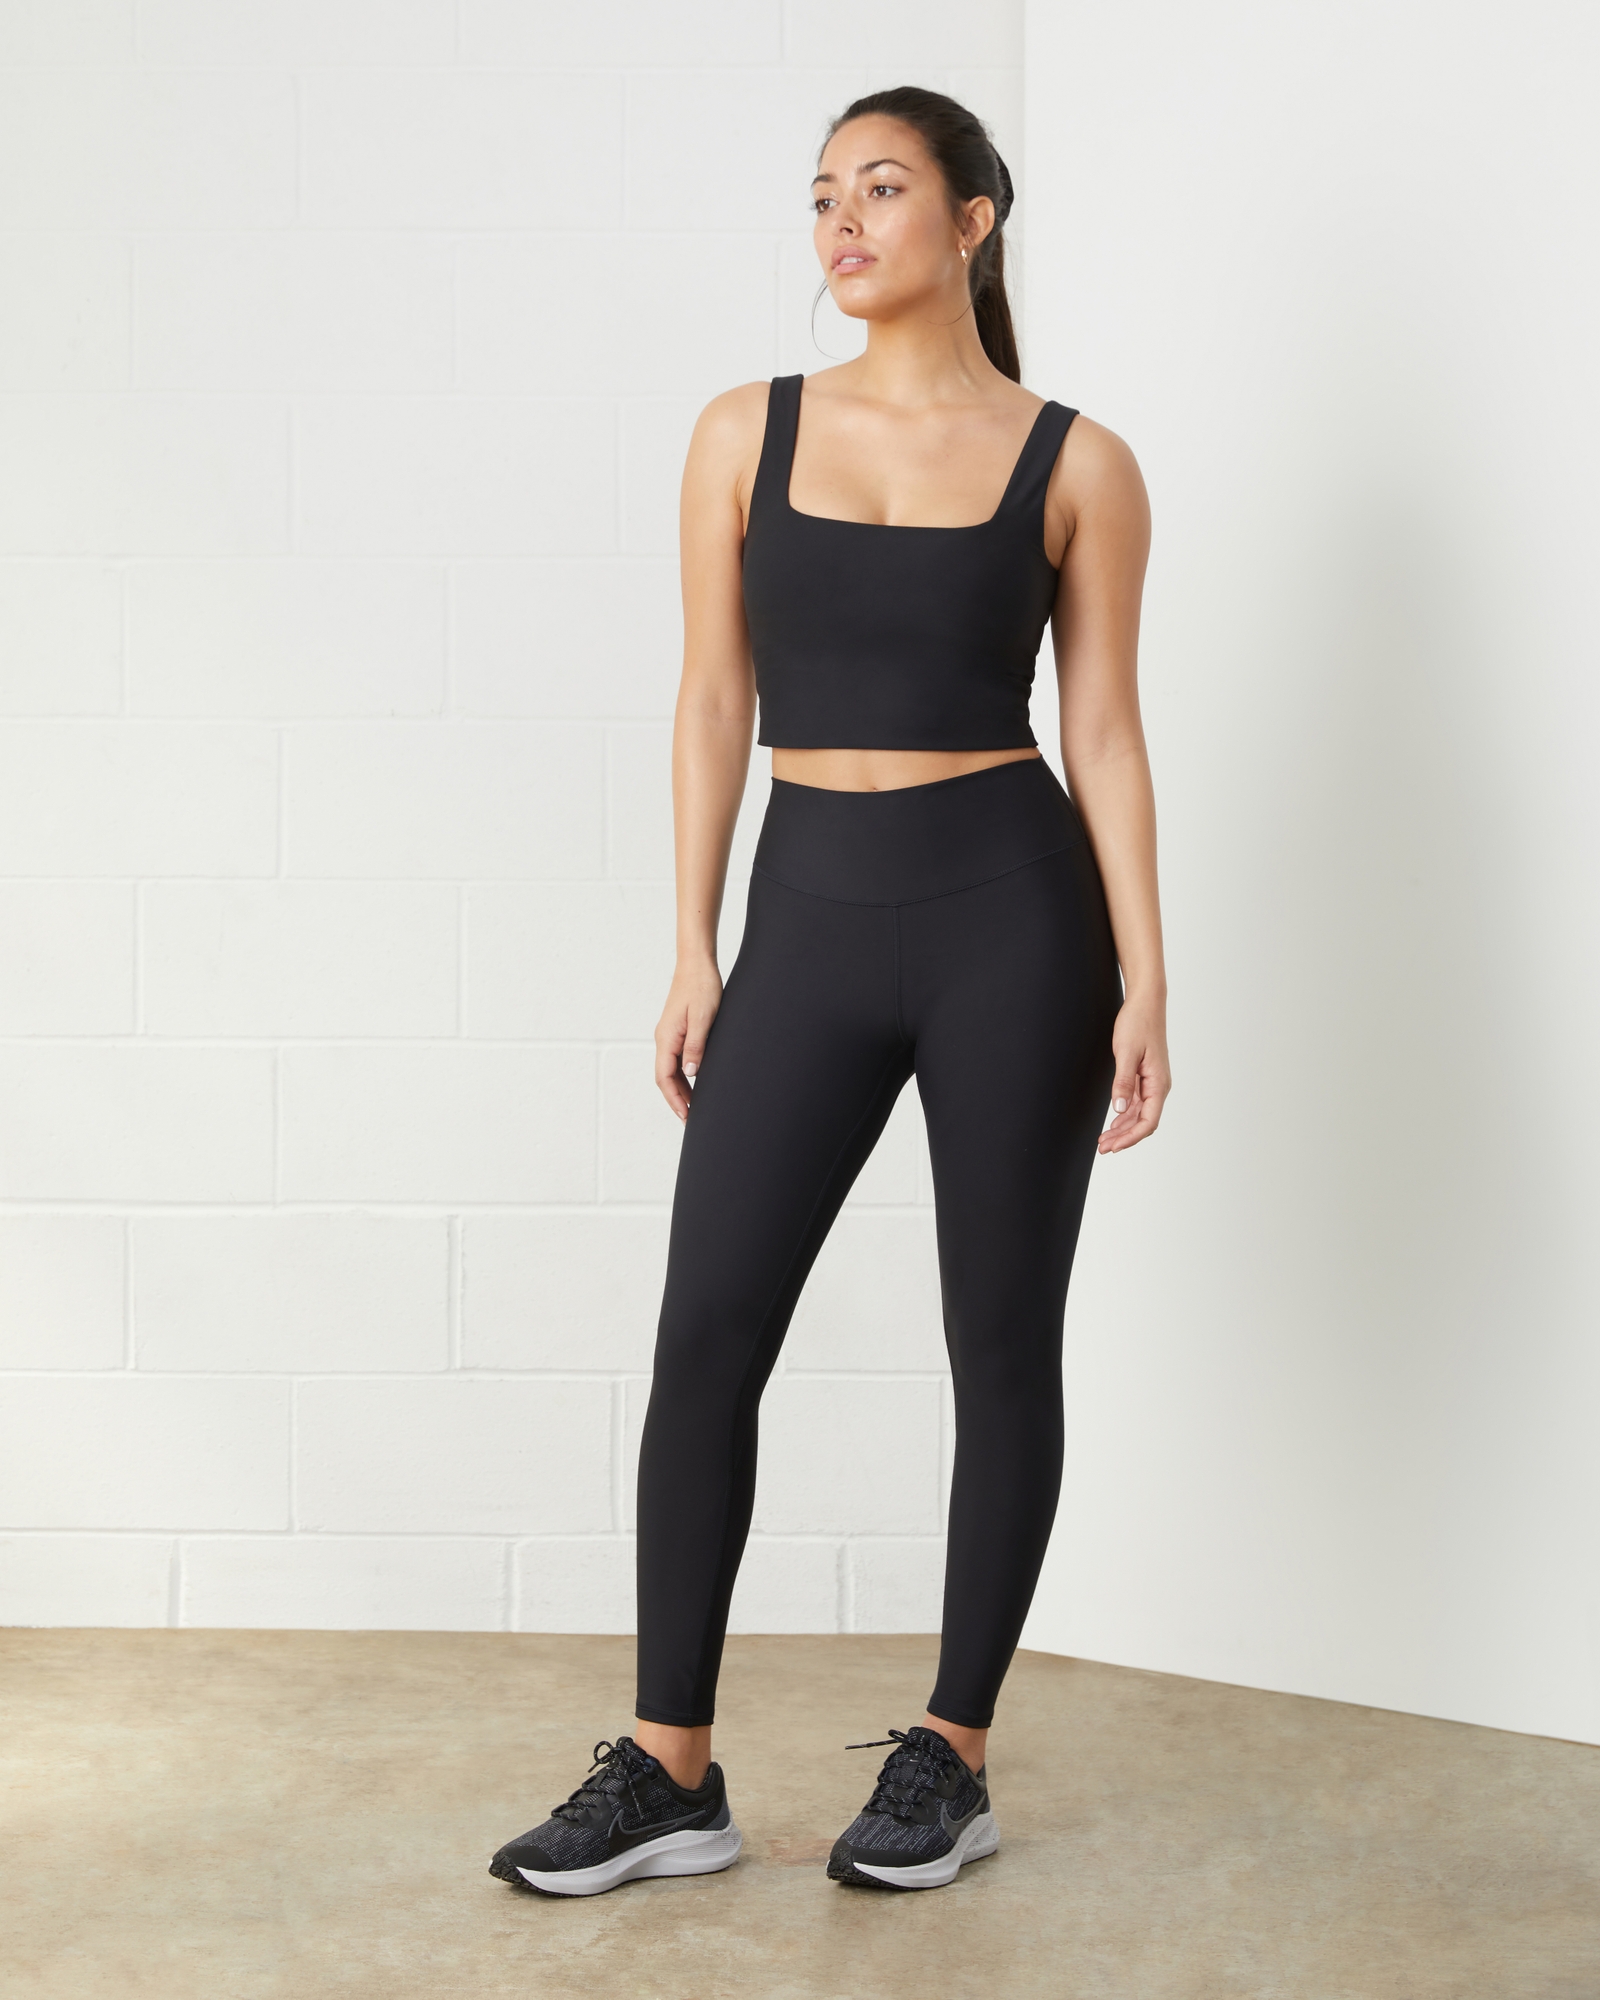 Asquith 7/8 Leggings Pebble: Medium - PLAISIRS - Wellbeing and